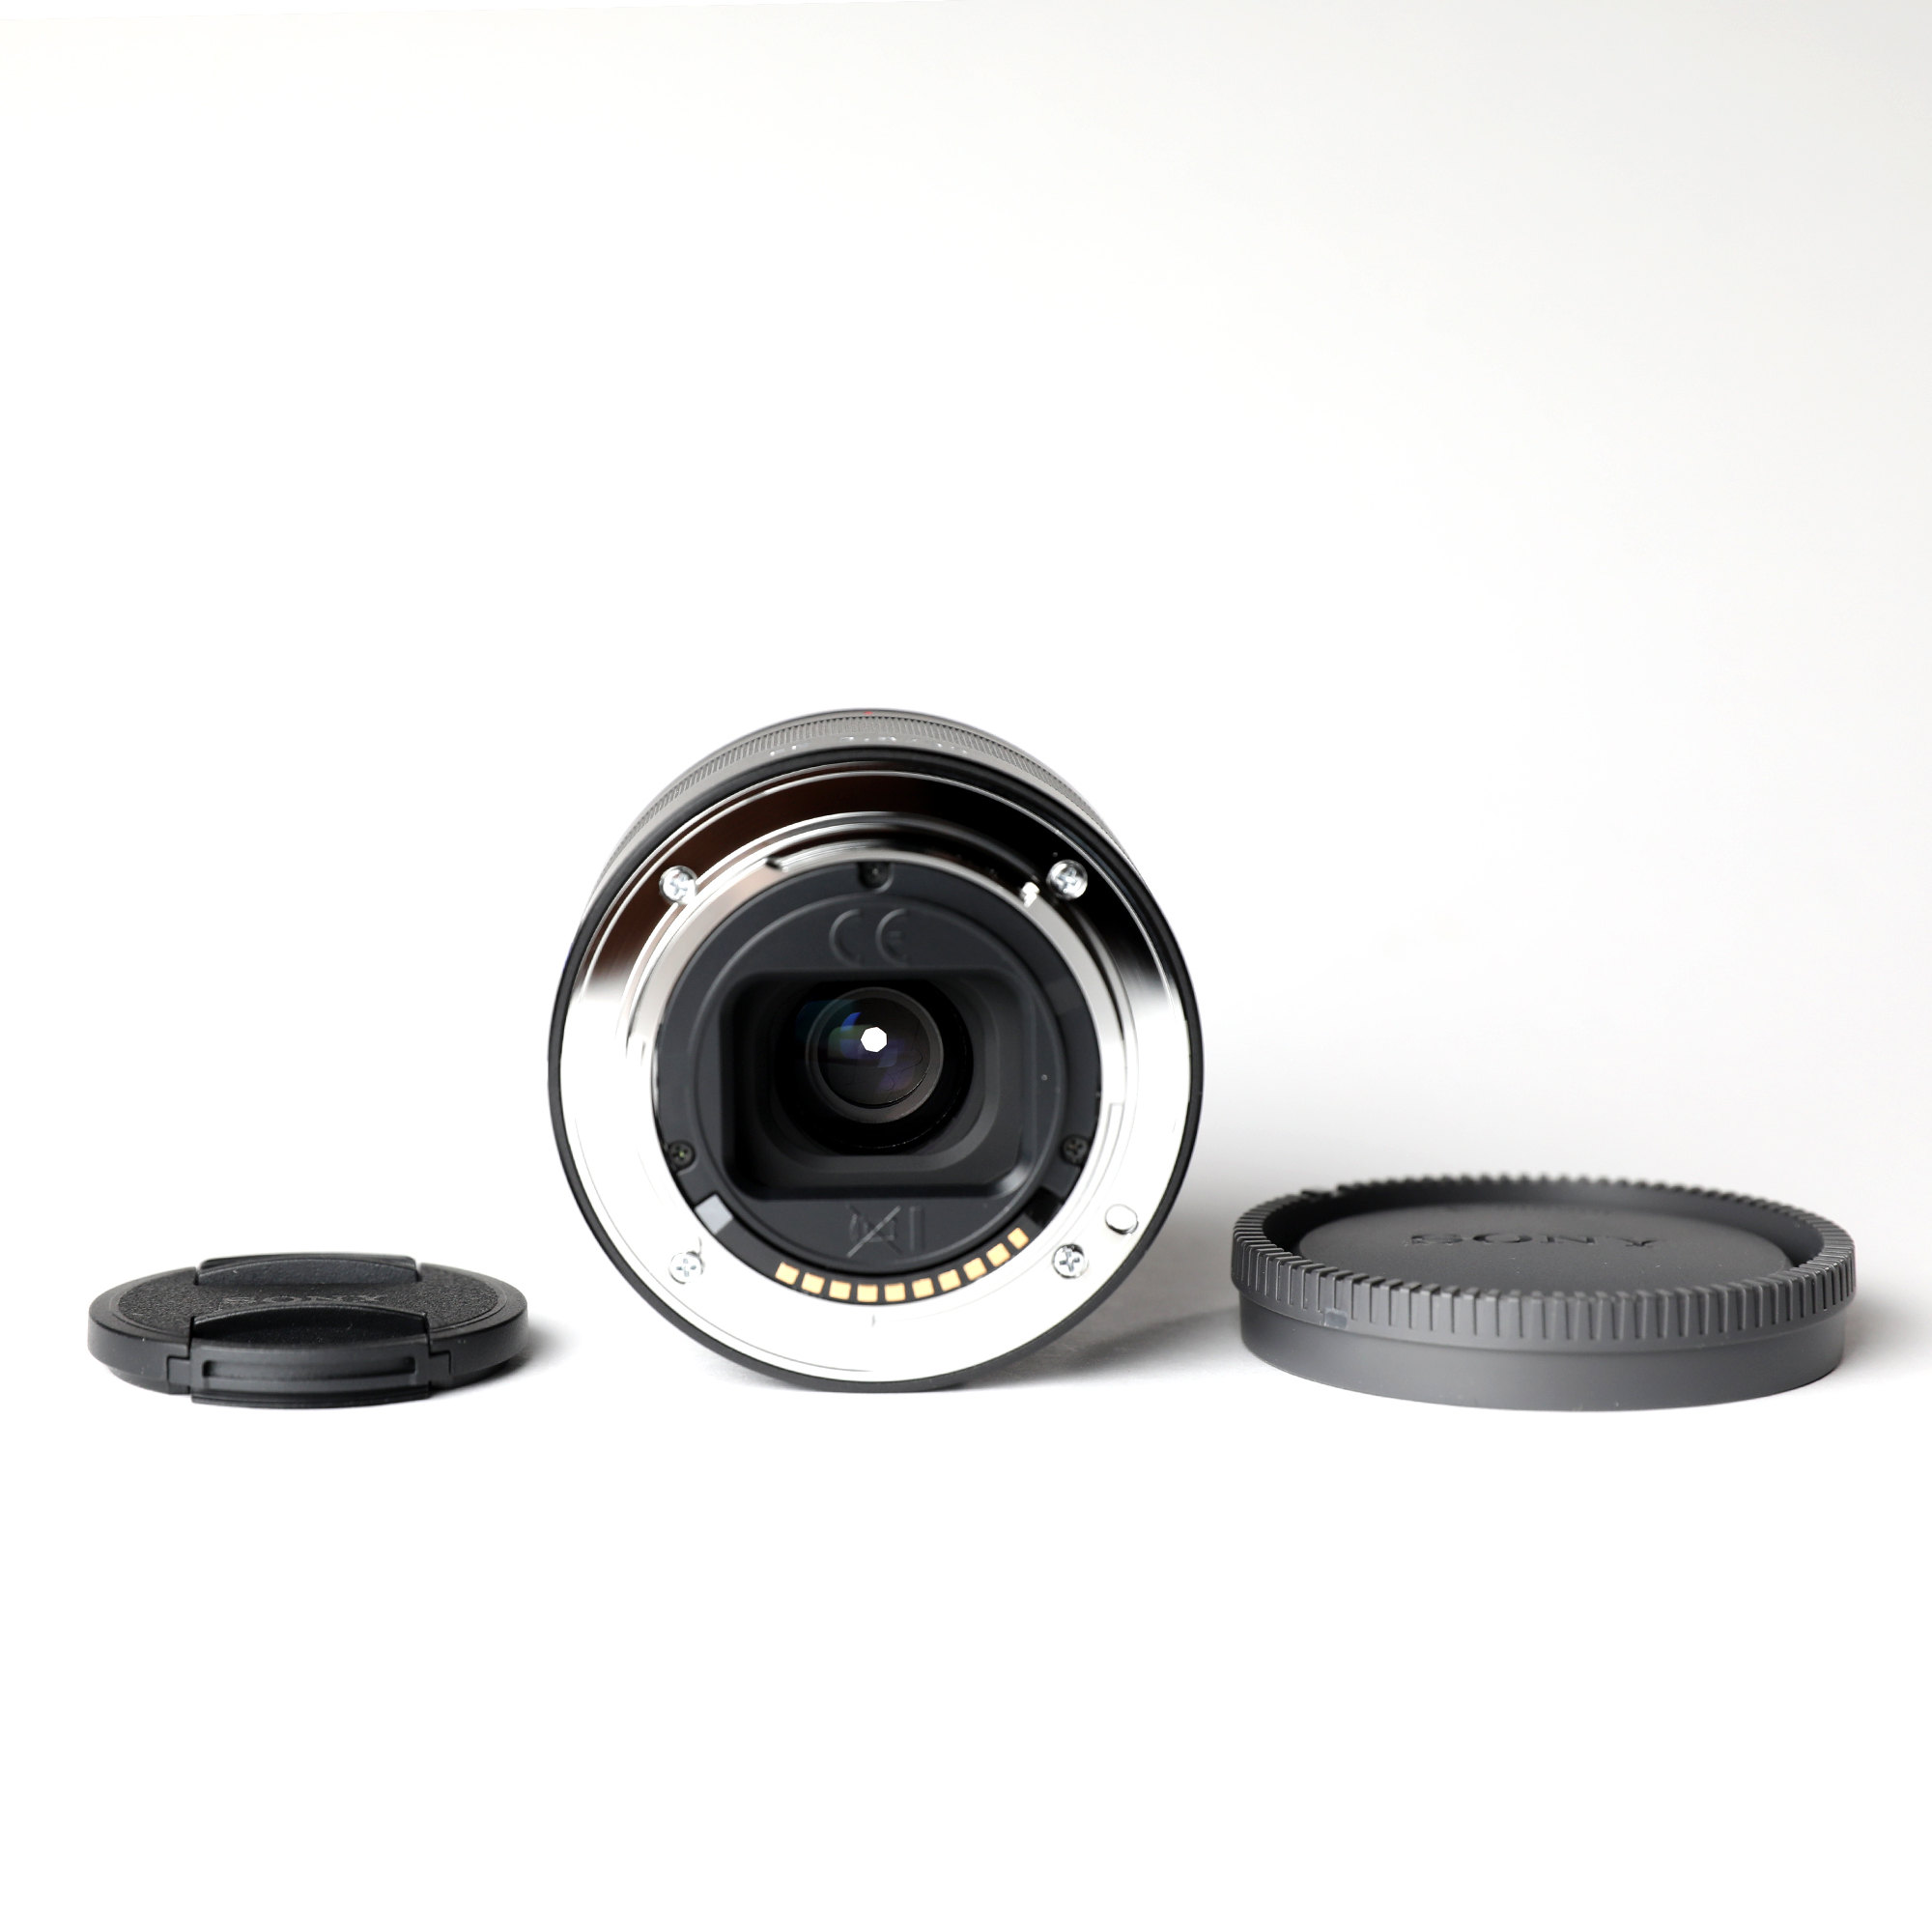 Sony Sonnar T* FE 35mm F2.8 ZA - VIILevent Online Store